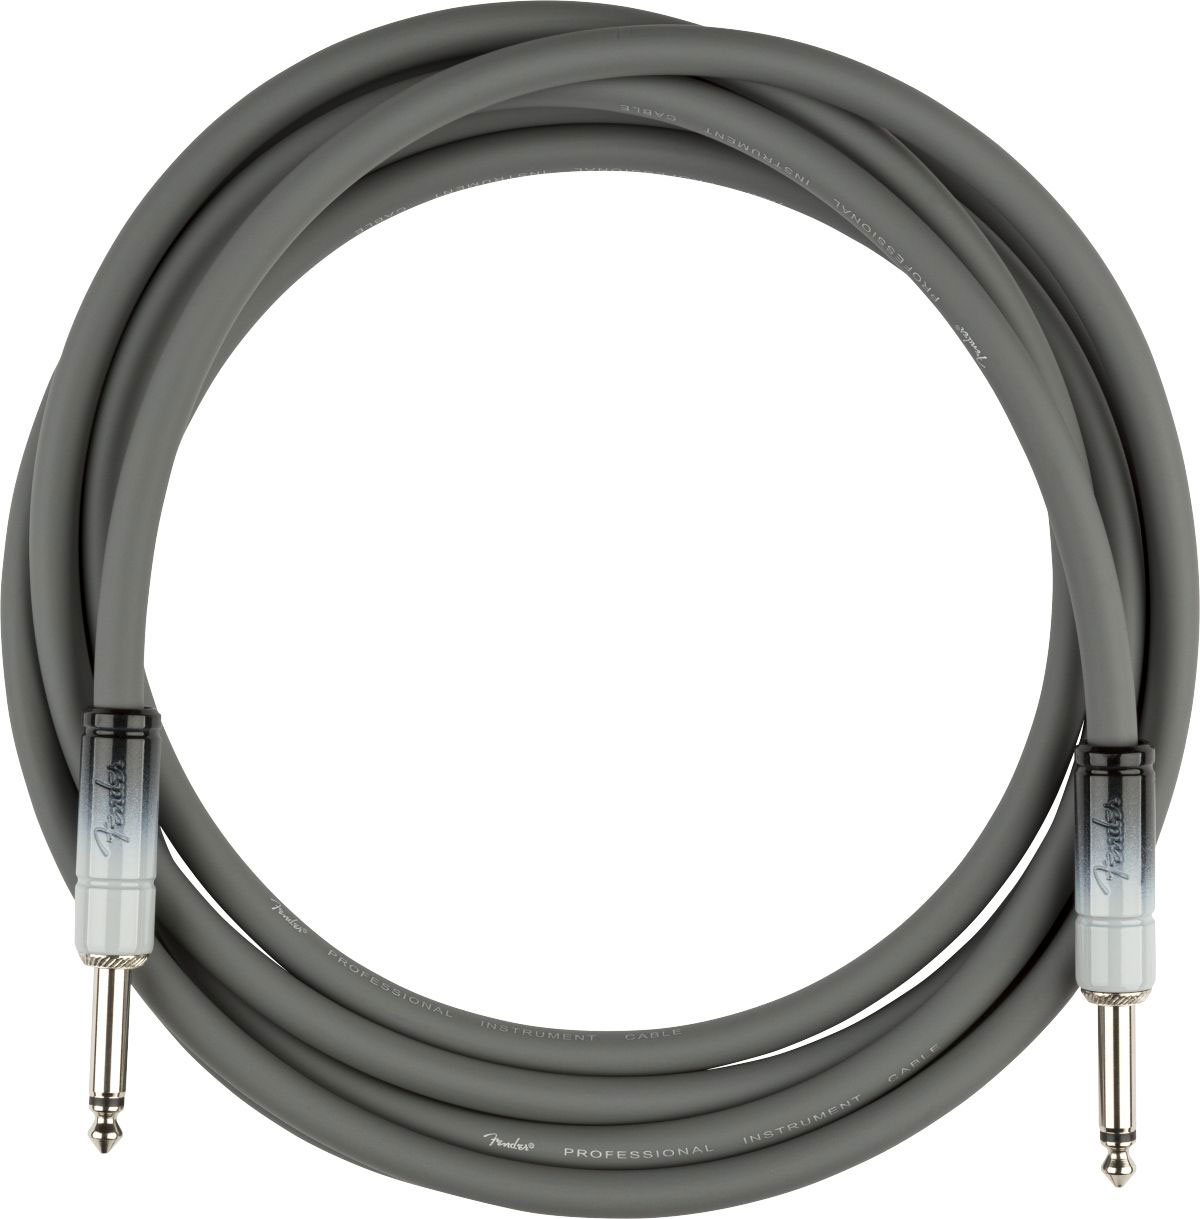 FENDER 10' OMBR CABLE SILVER SMOKE